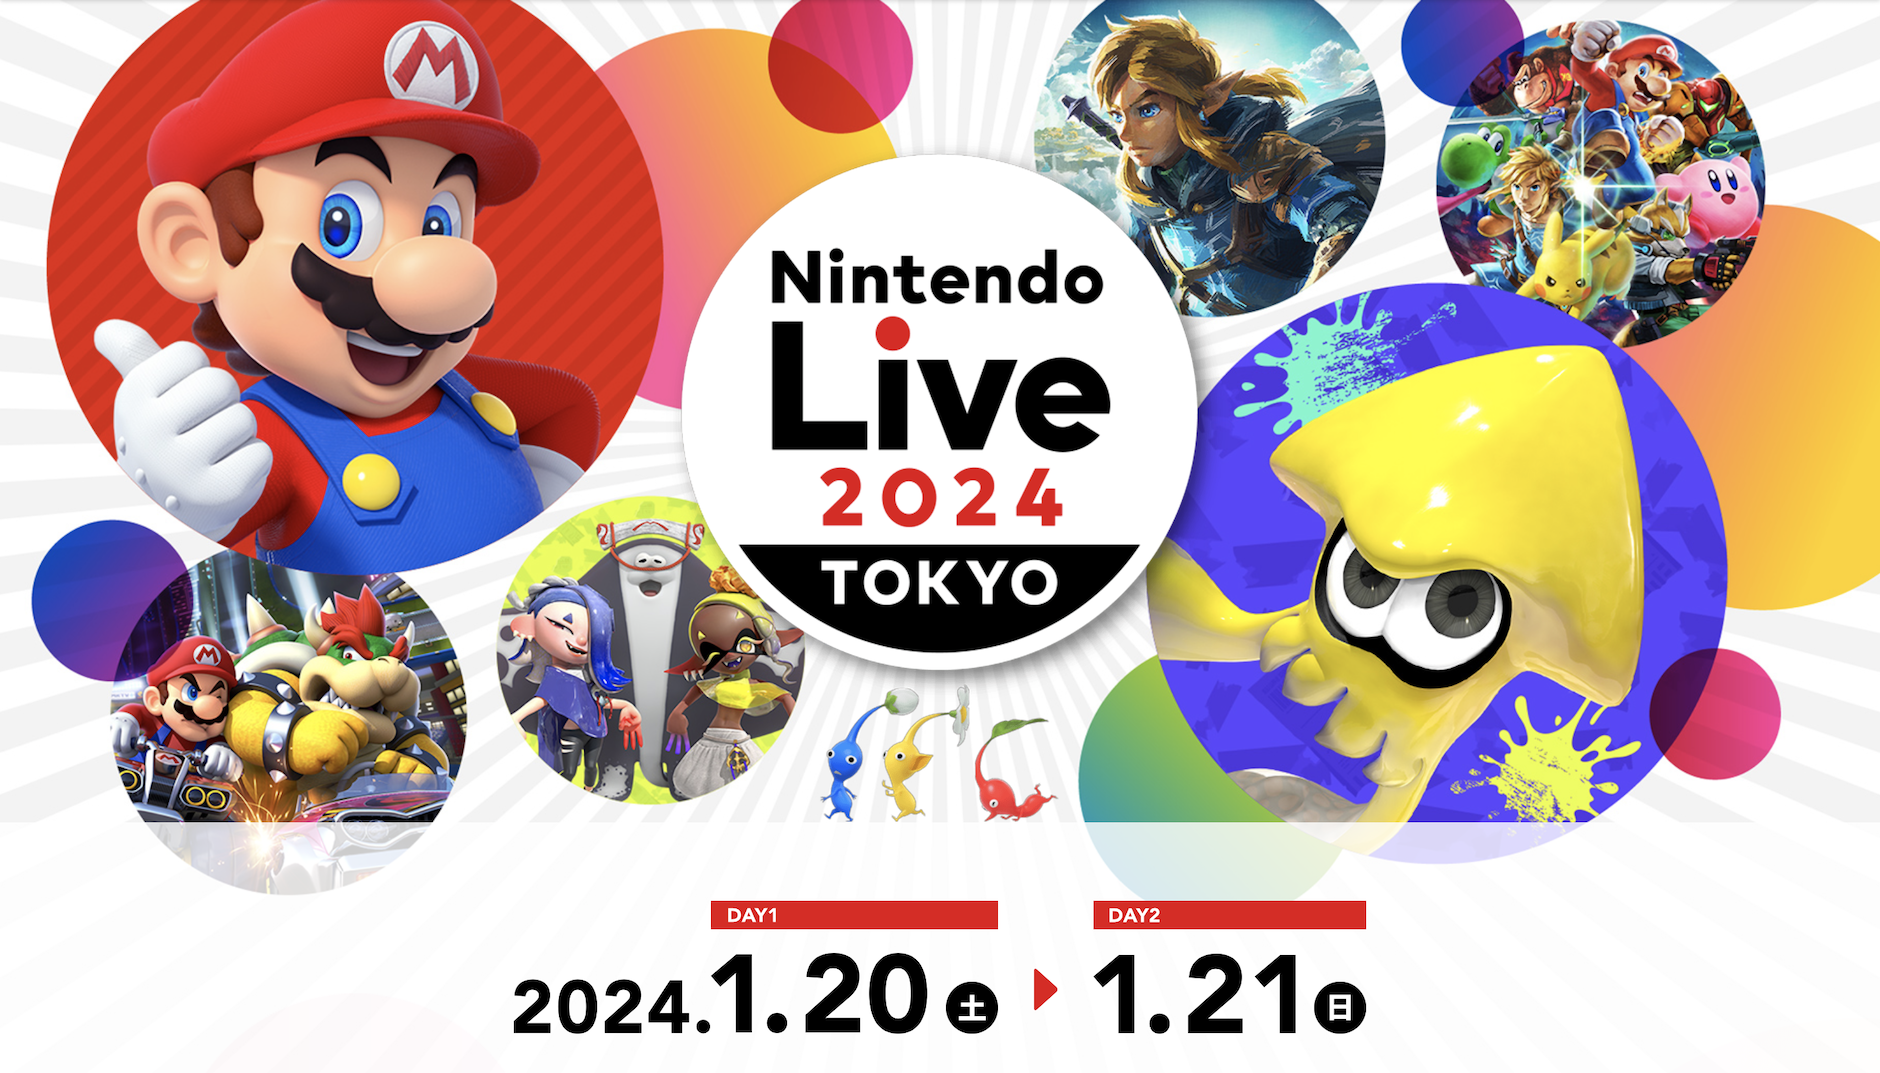 Nintendo Live Coming Back to Tokyo in January 2024